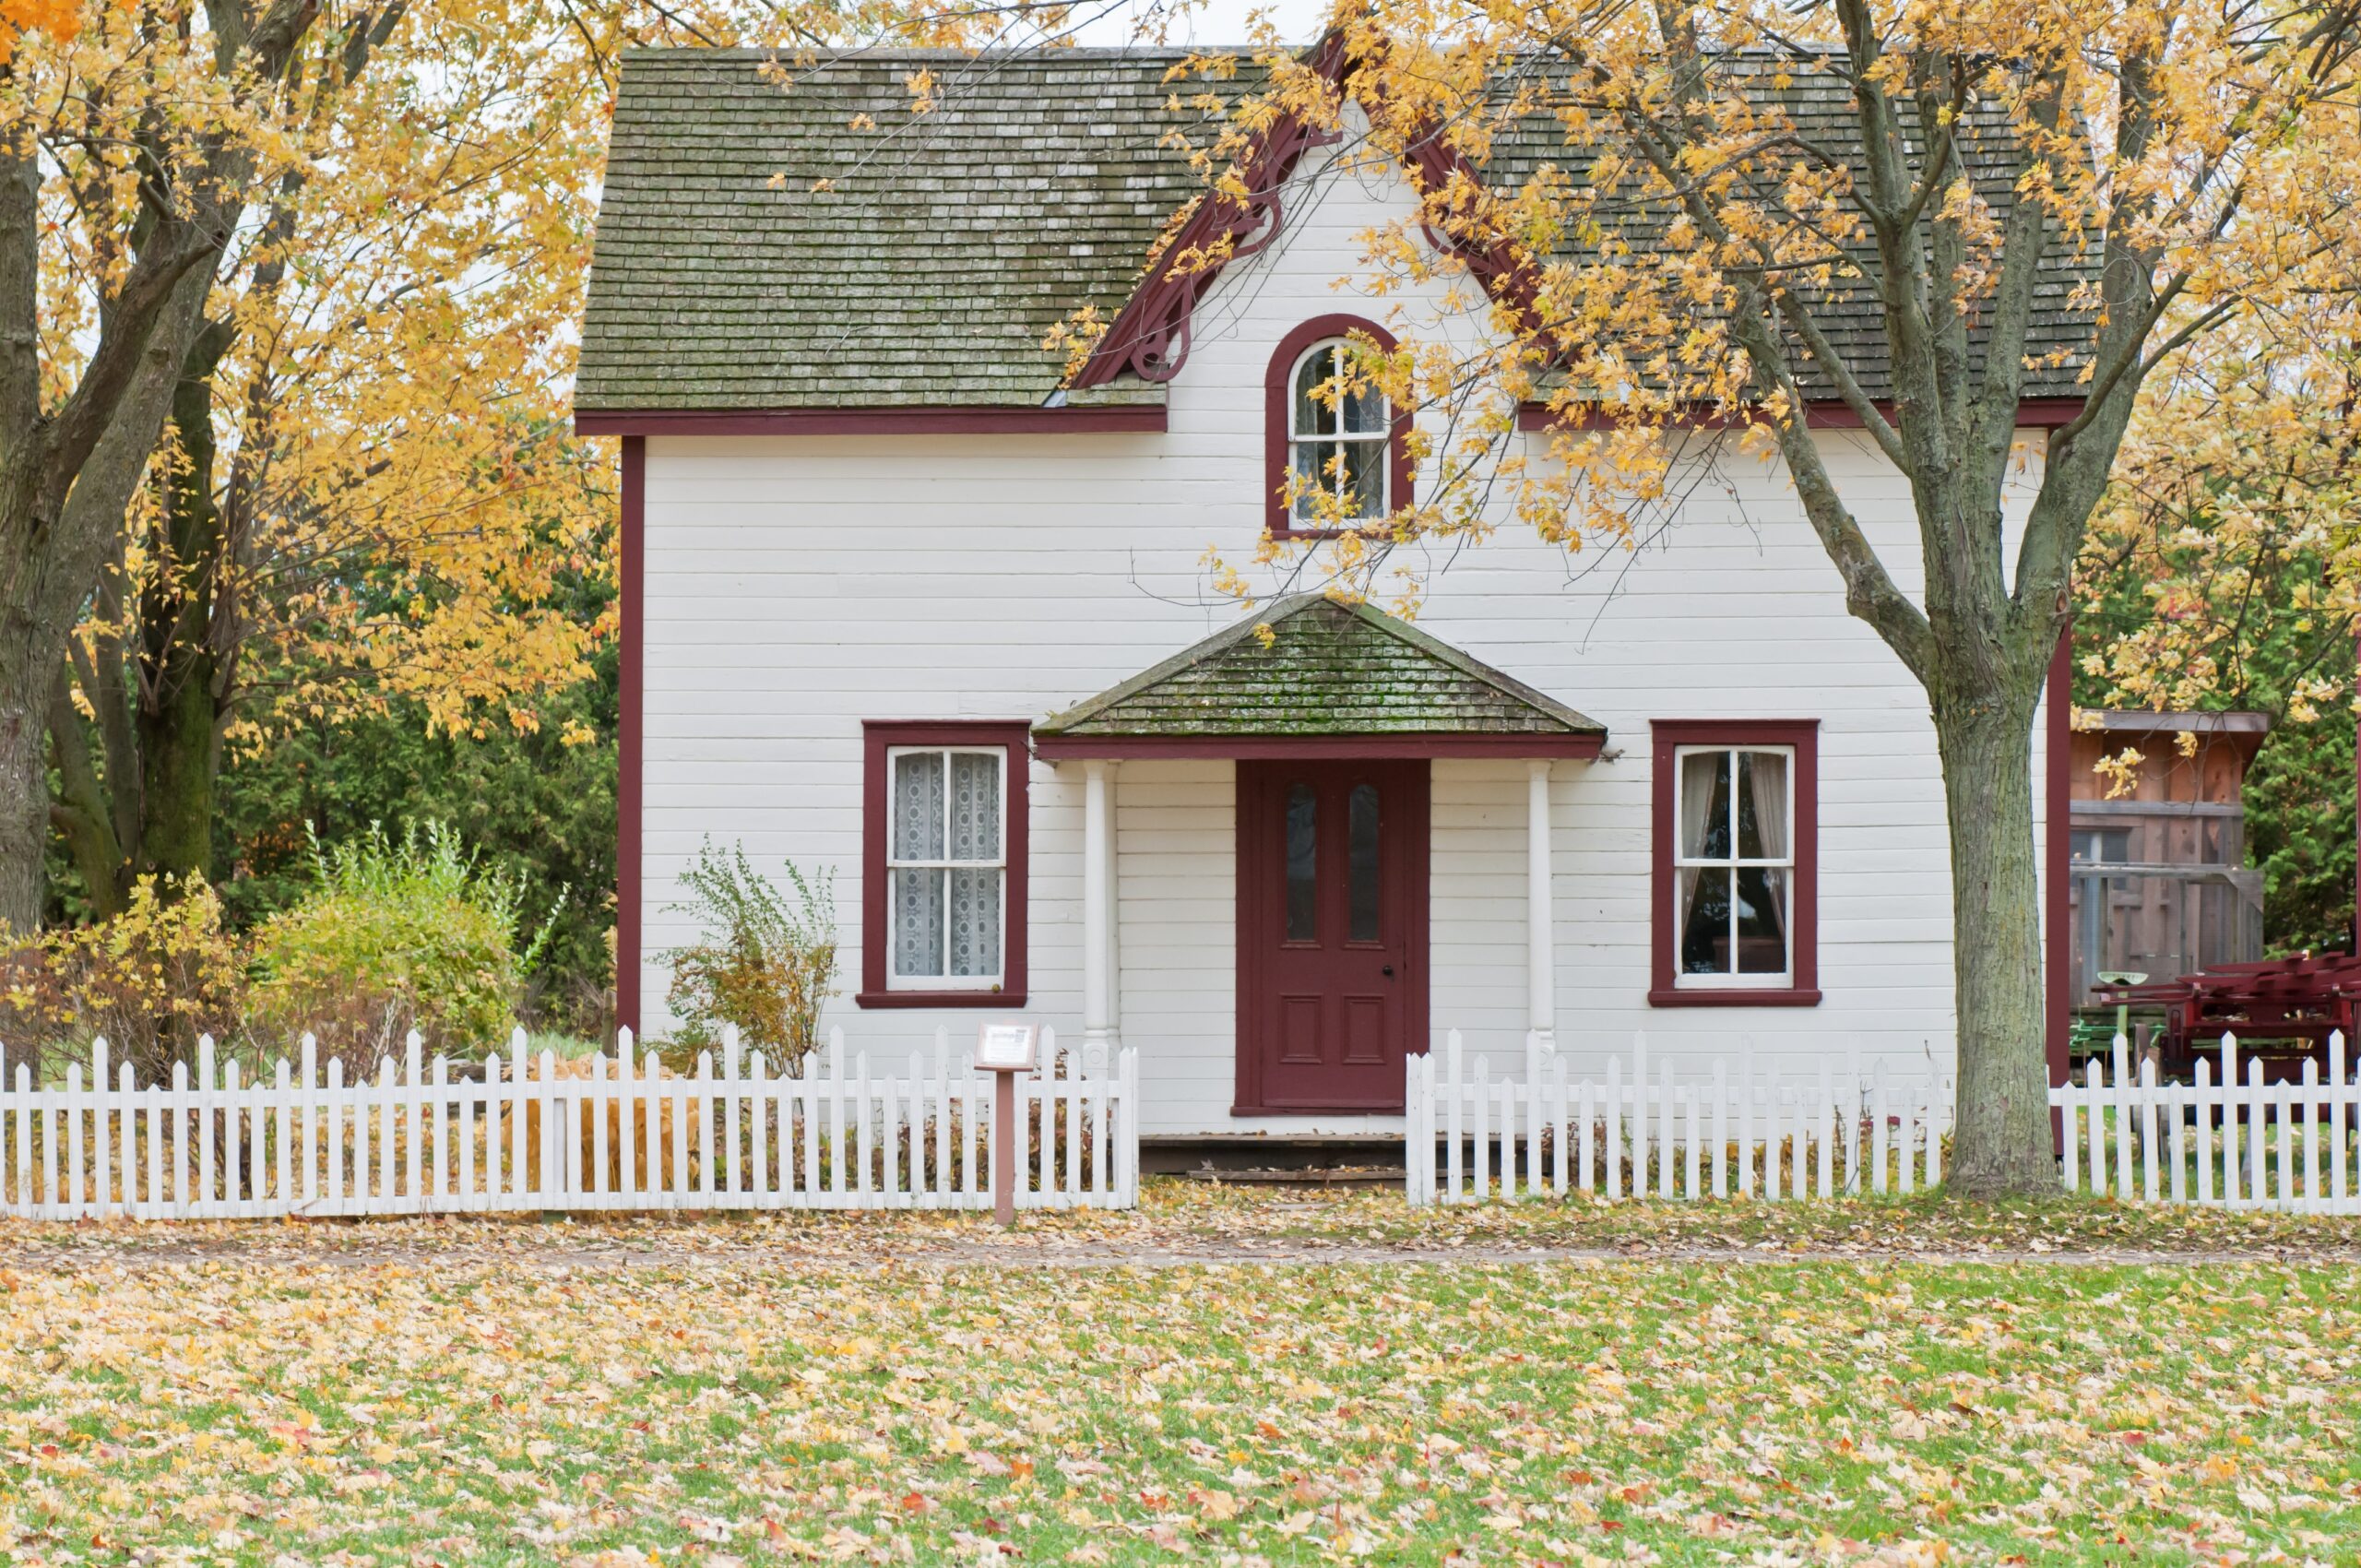 Nine Things That Could Add to Your Home's Curb Appeal